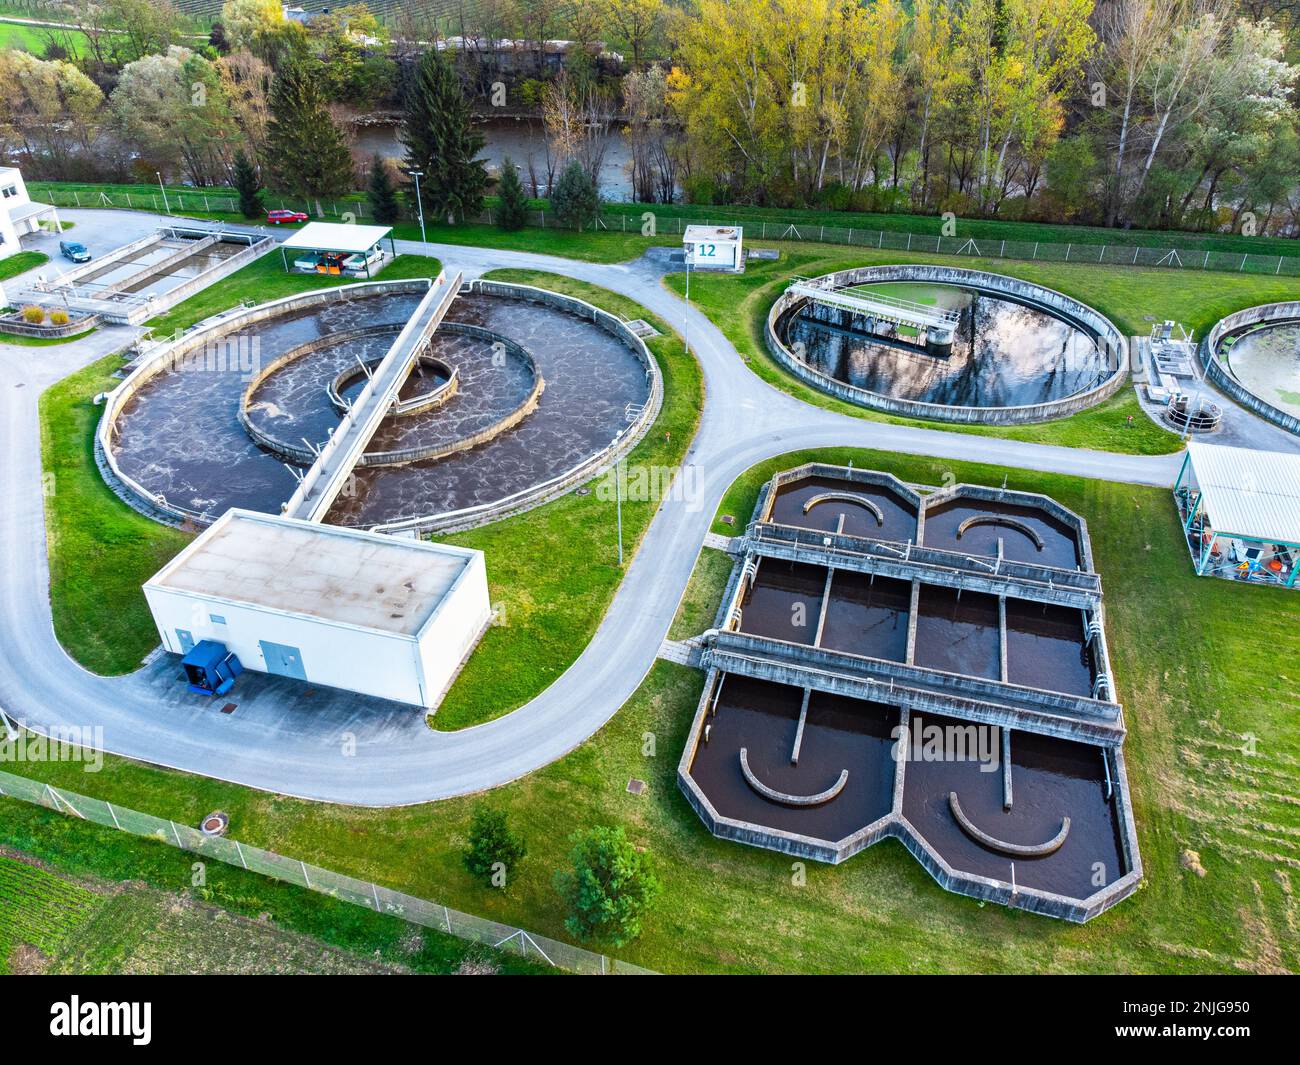 Waste water treatment plant in the country side of Slovenia. Aerial views. Cleaning the environment, taking care of a better future with sewage treatm Stock Photo